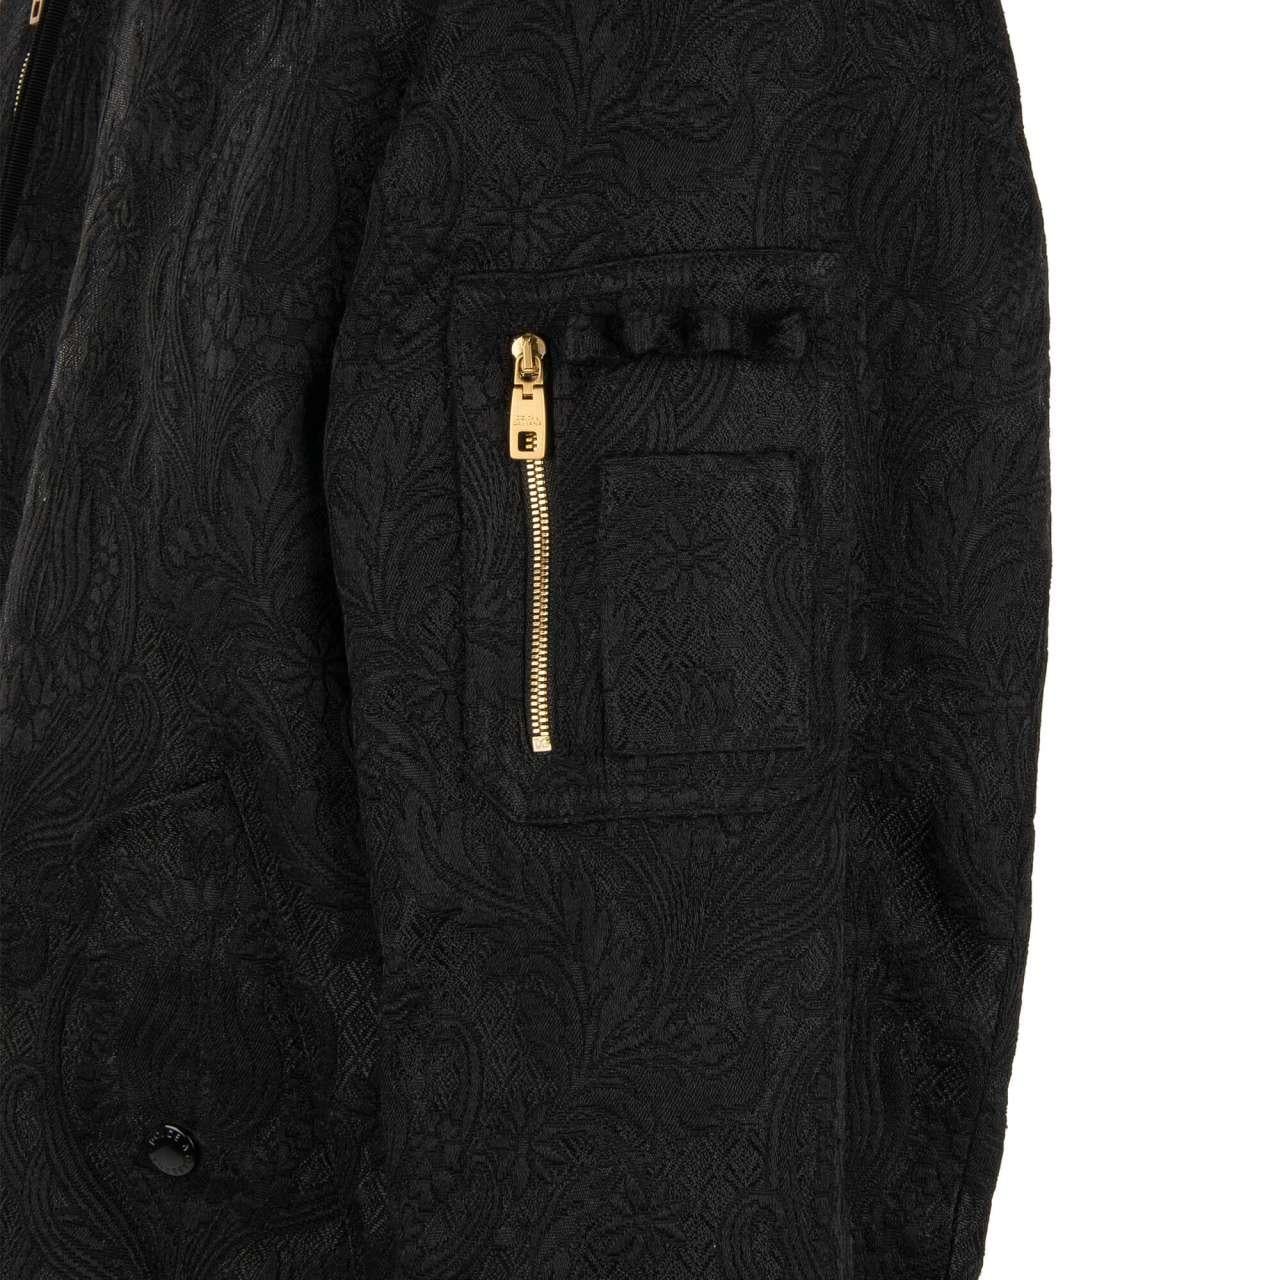 Dolce & Gabbana Brocade Bomber Jacket with Zip Closure and Pockets Black 56 For Sale 3